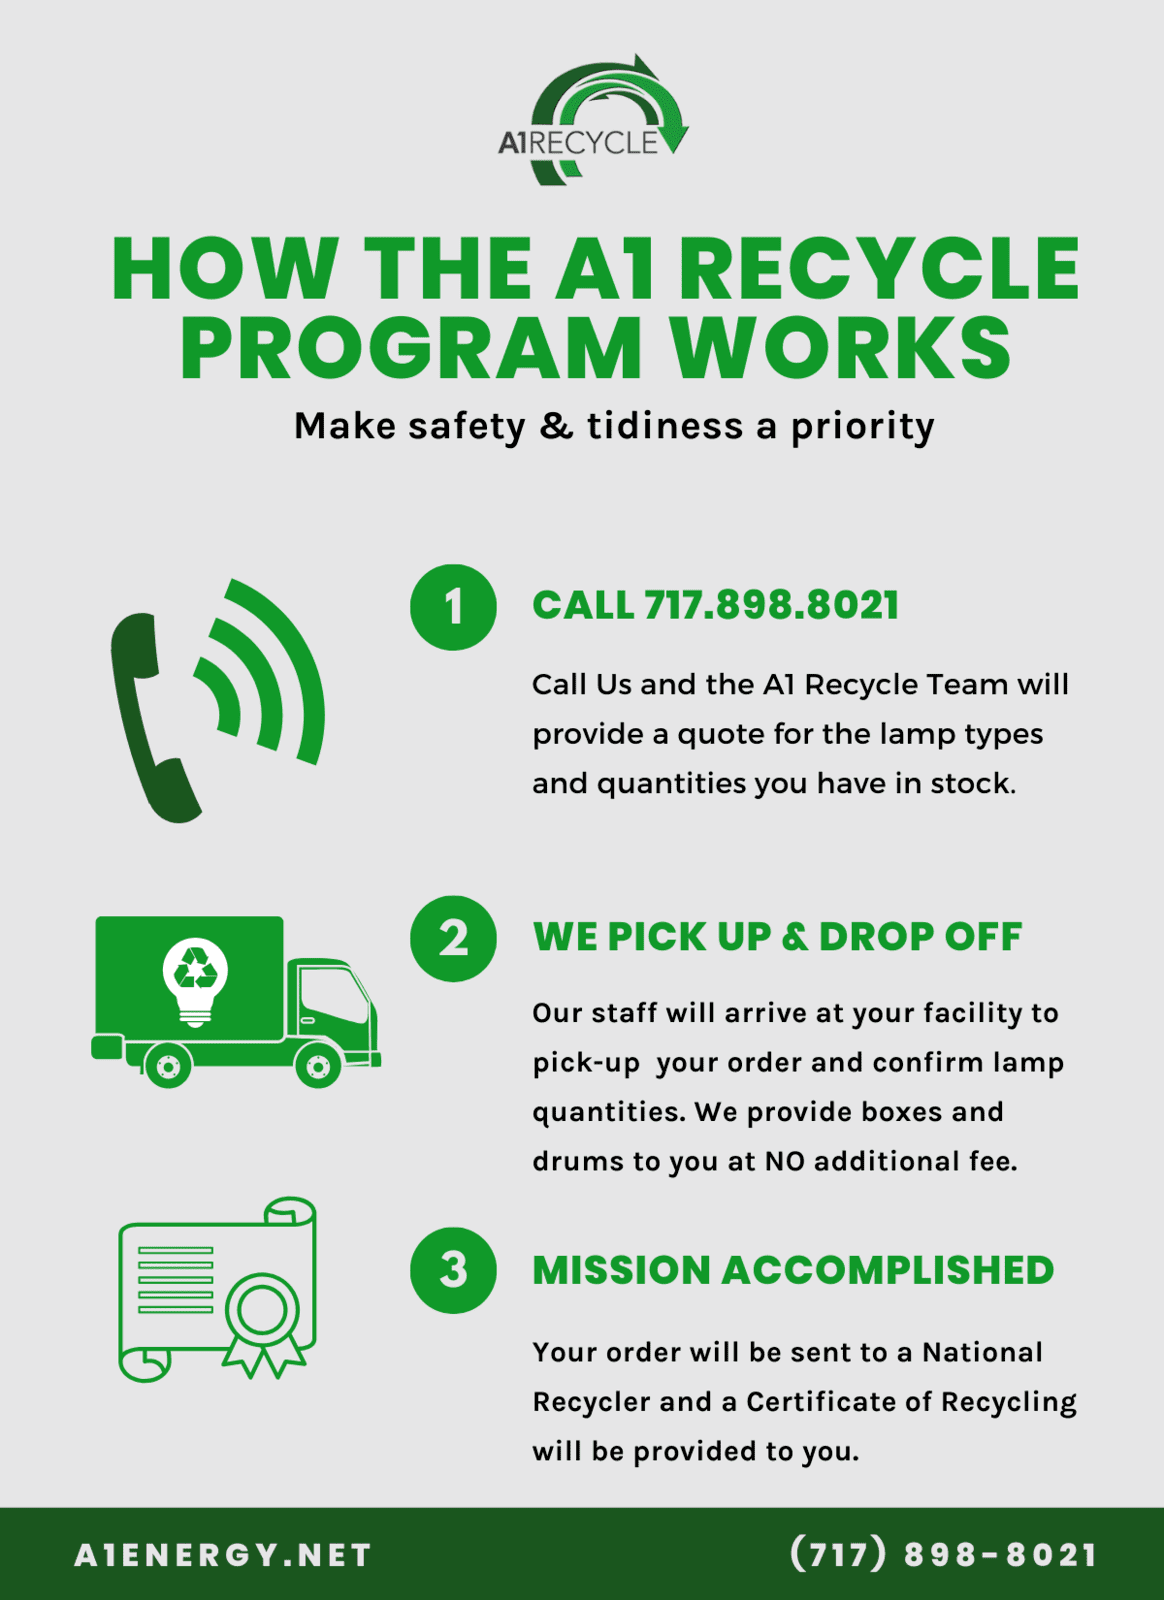 How our recycling program works